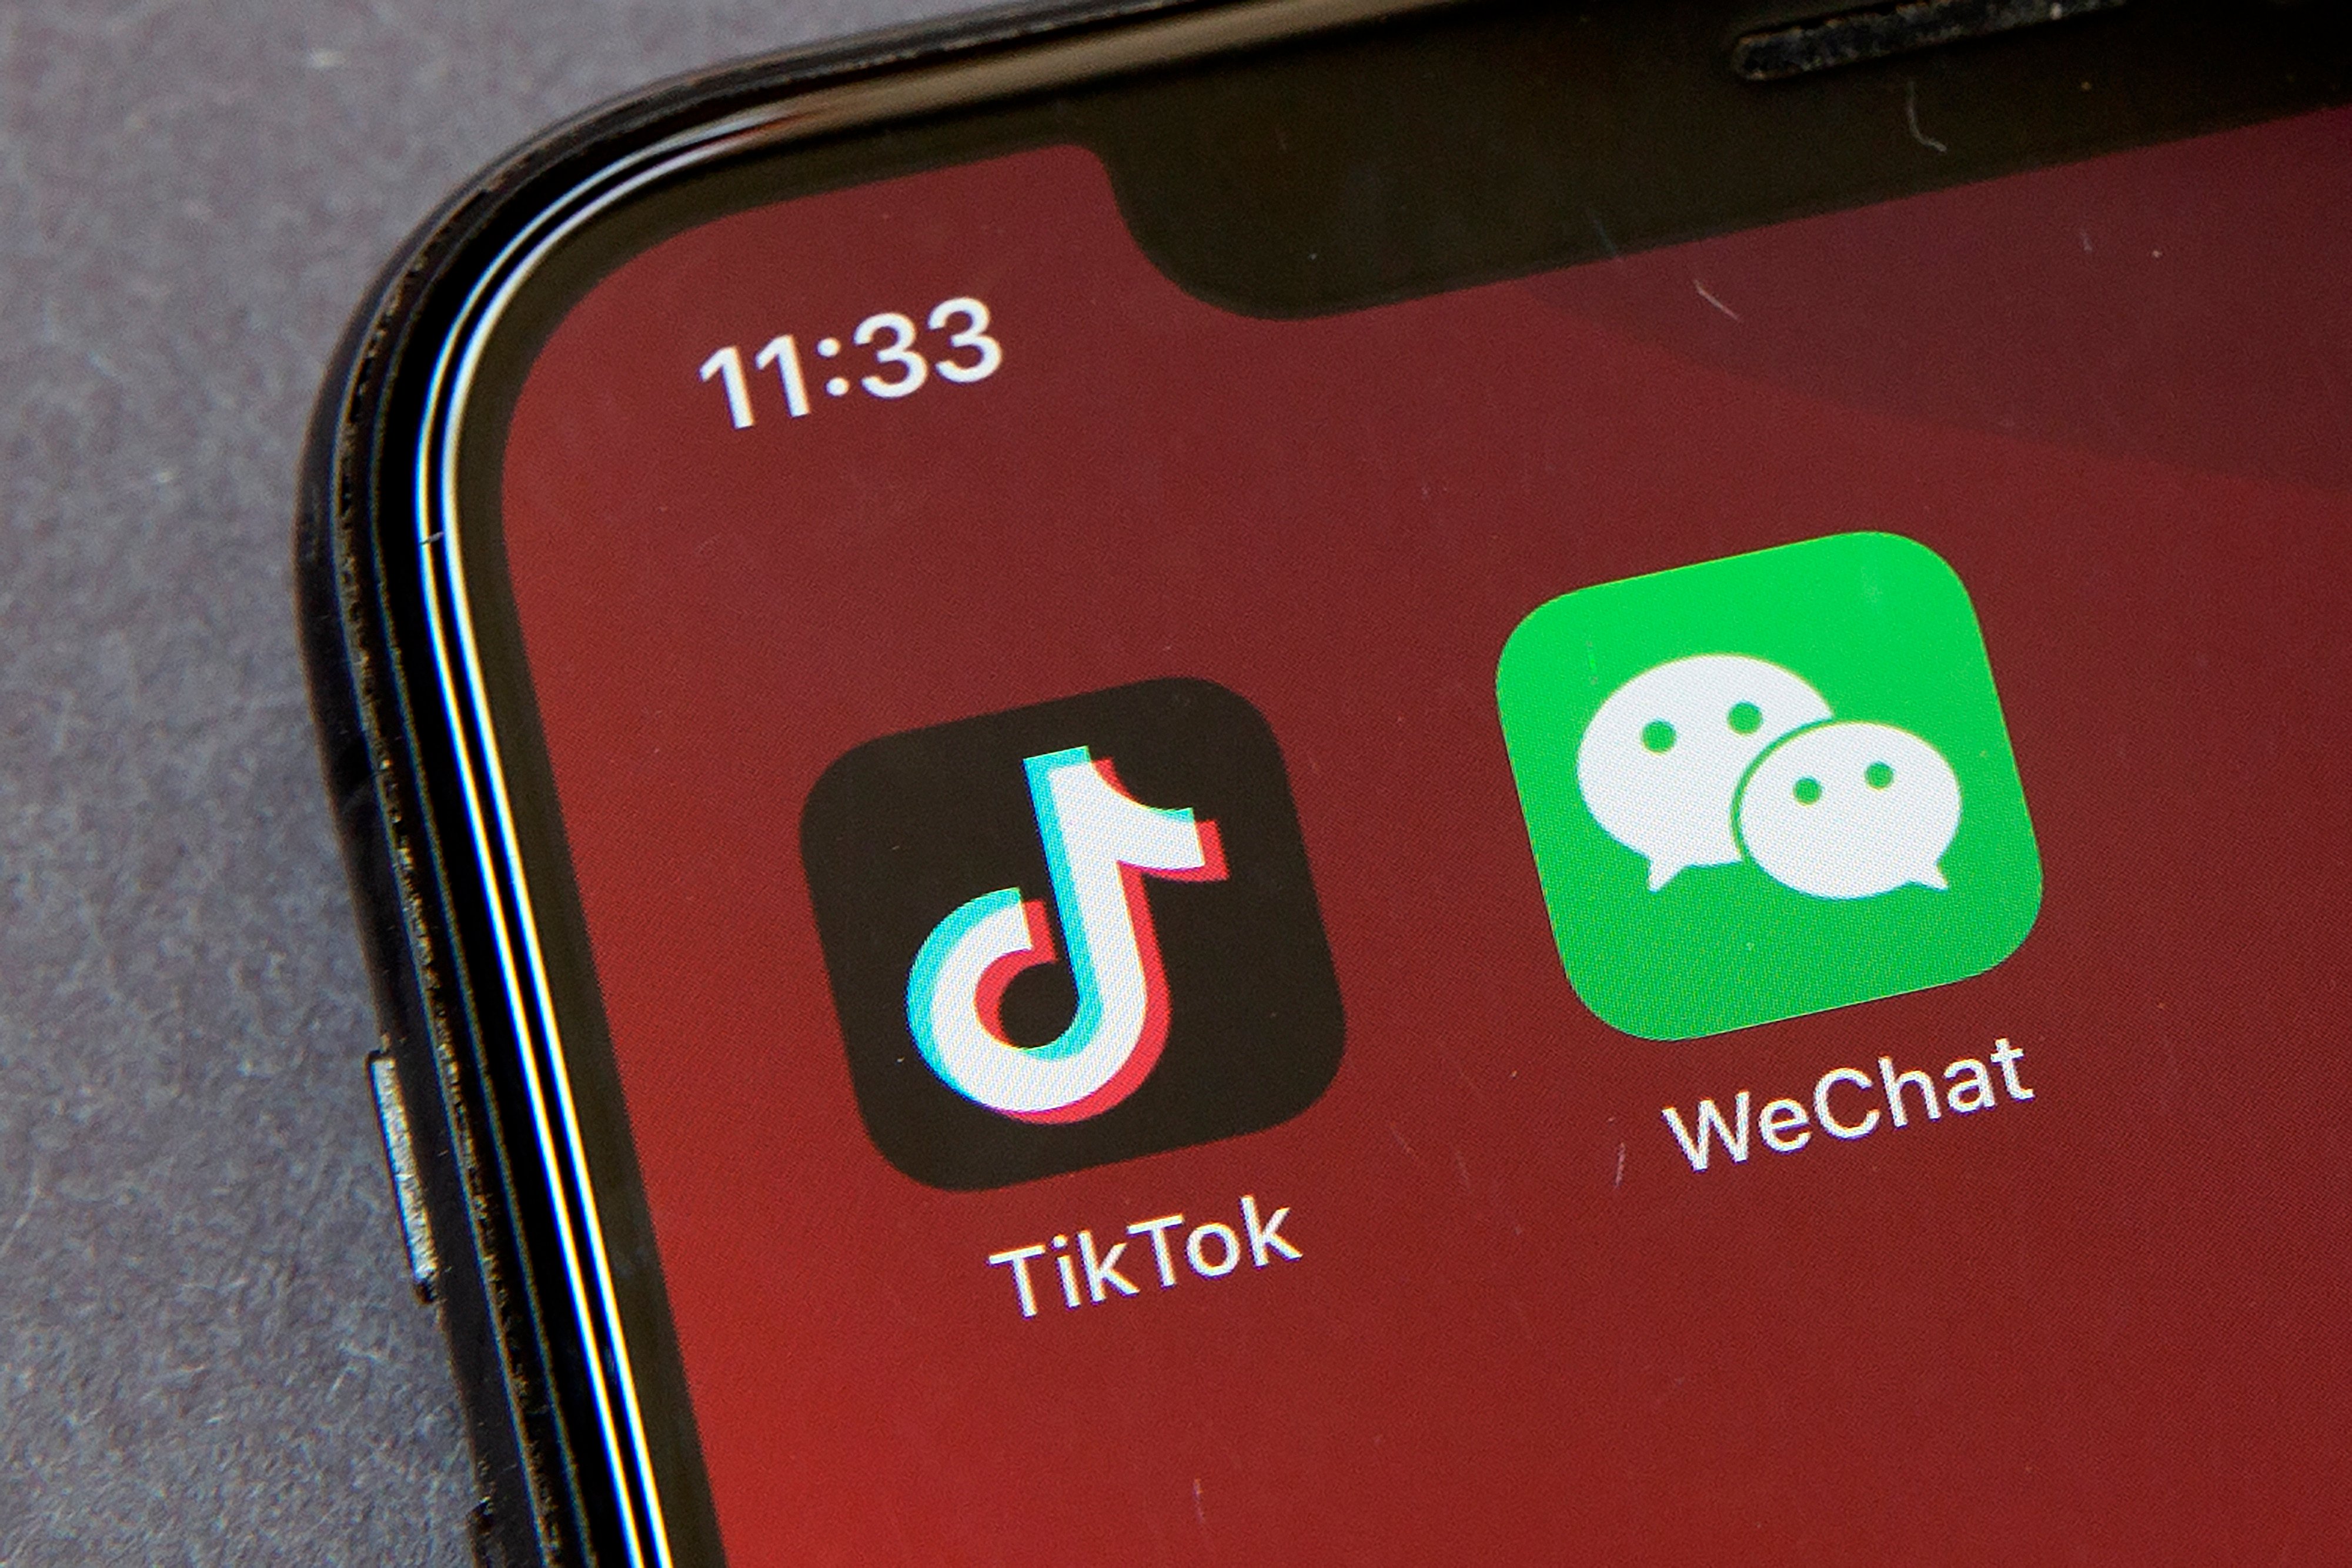 The inquiry report asked Canberra to map out “existing exposure to high-risk vendors such as TikTok, WeChat and any similar apps”. Photo: AP